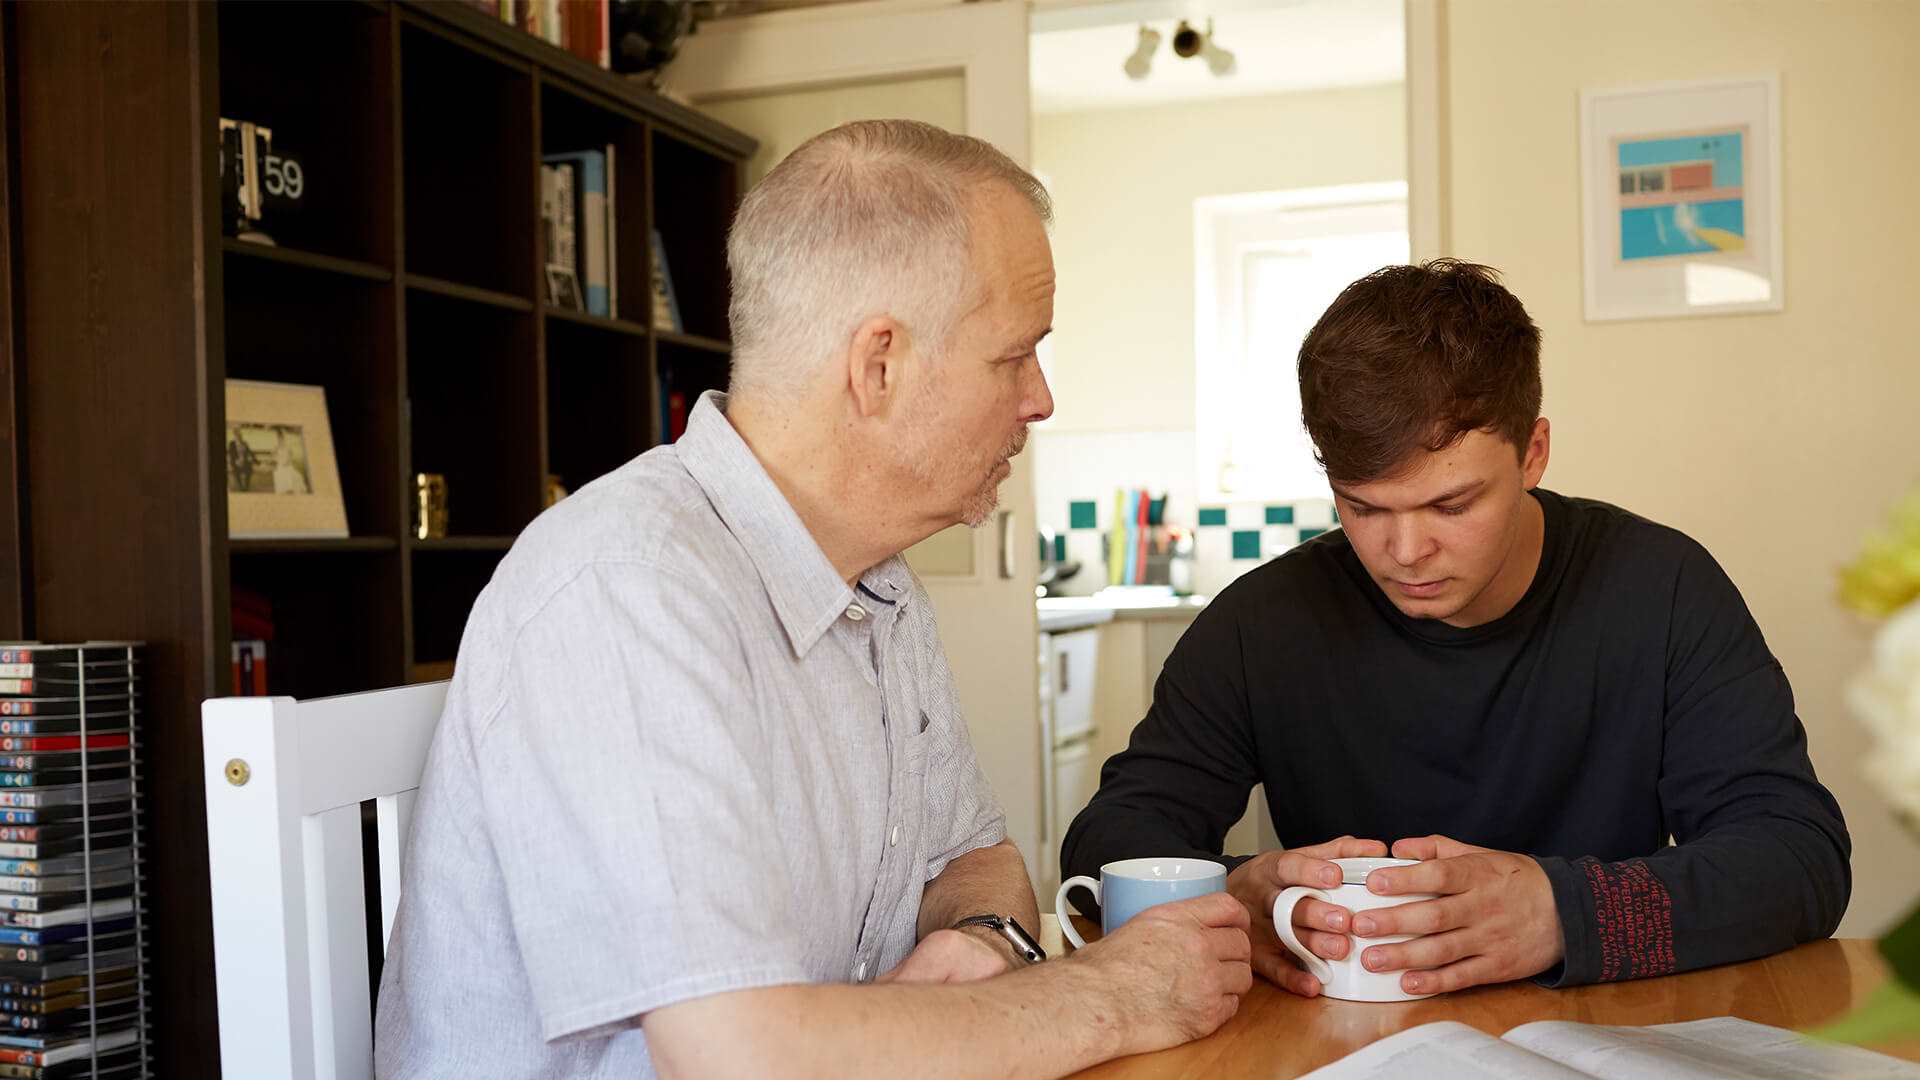 A father and son sitting at a table with hot drinks and serious facial expressions